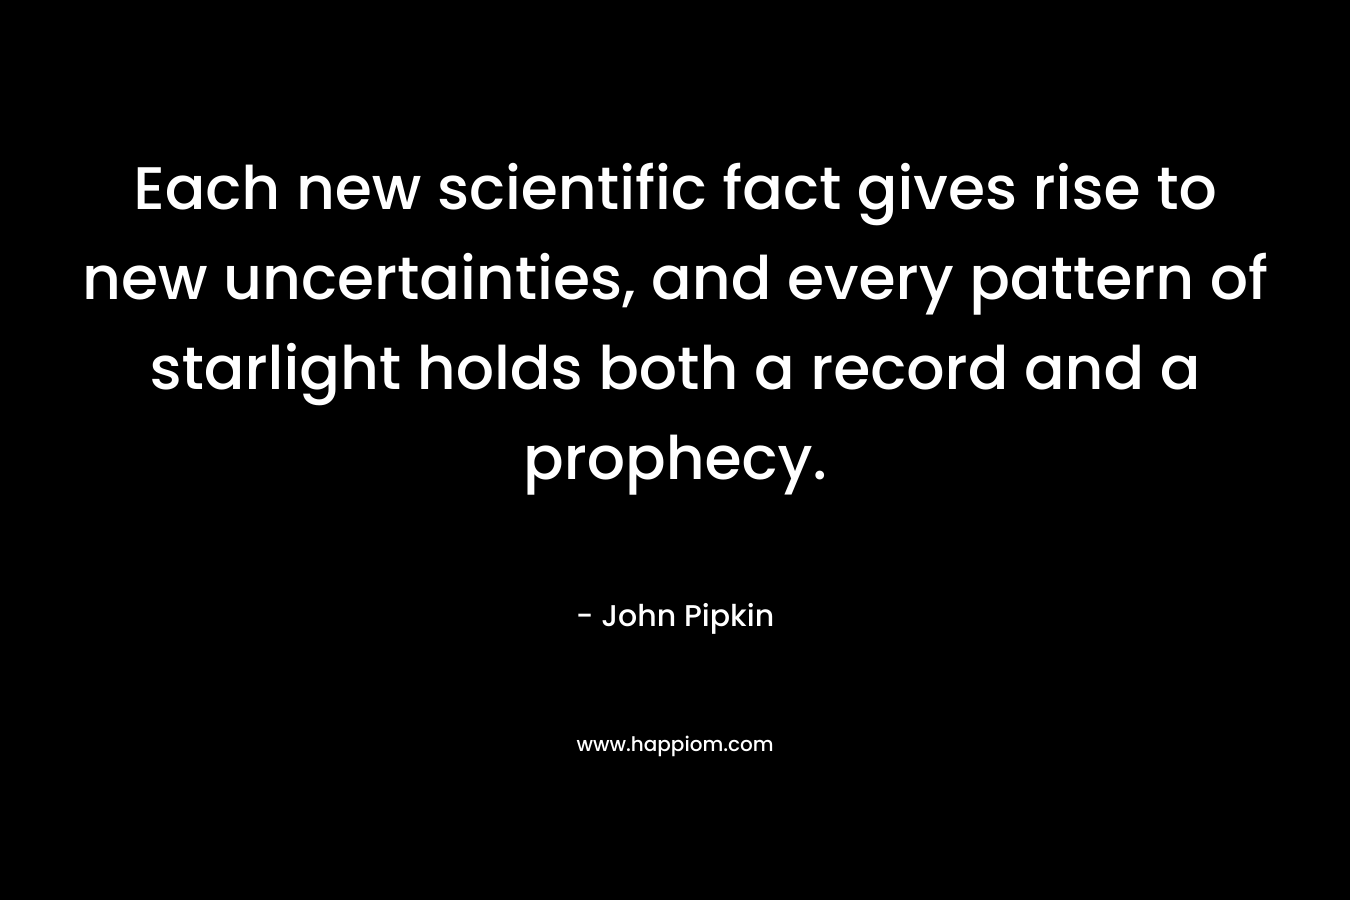 Each new scientific fact gives rise to new uncertainties, and every pattern of starlight holds both a record and a prophecy. – John Pipkin